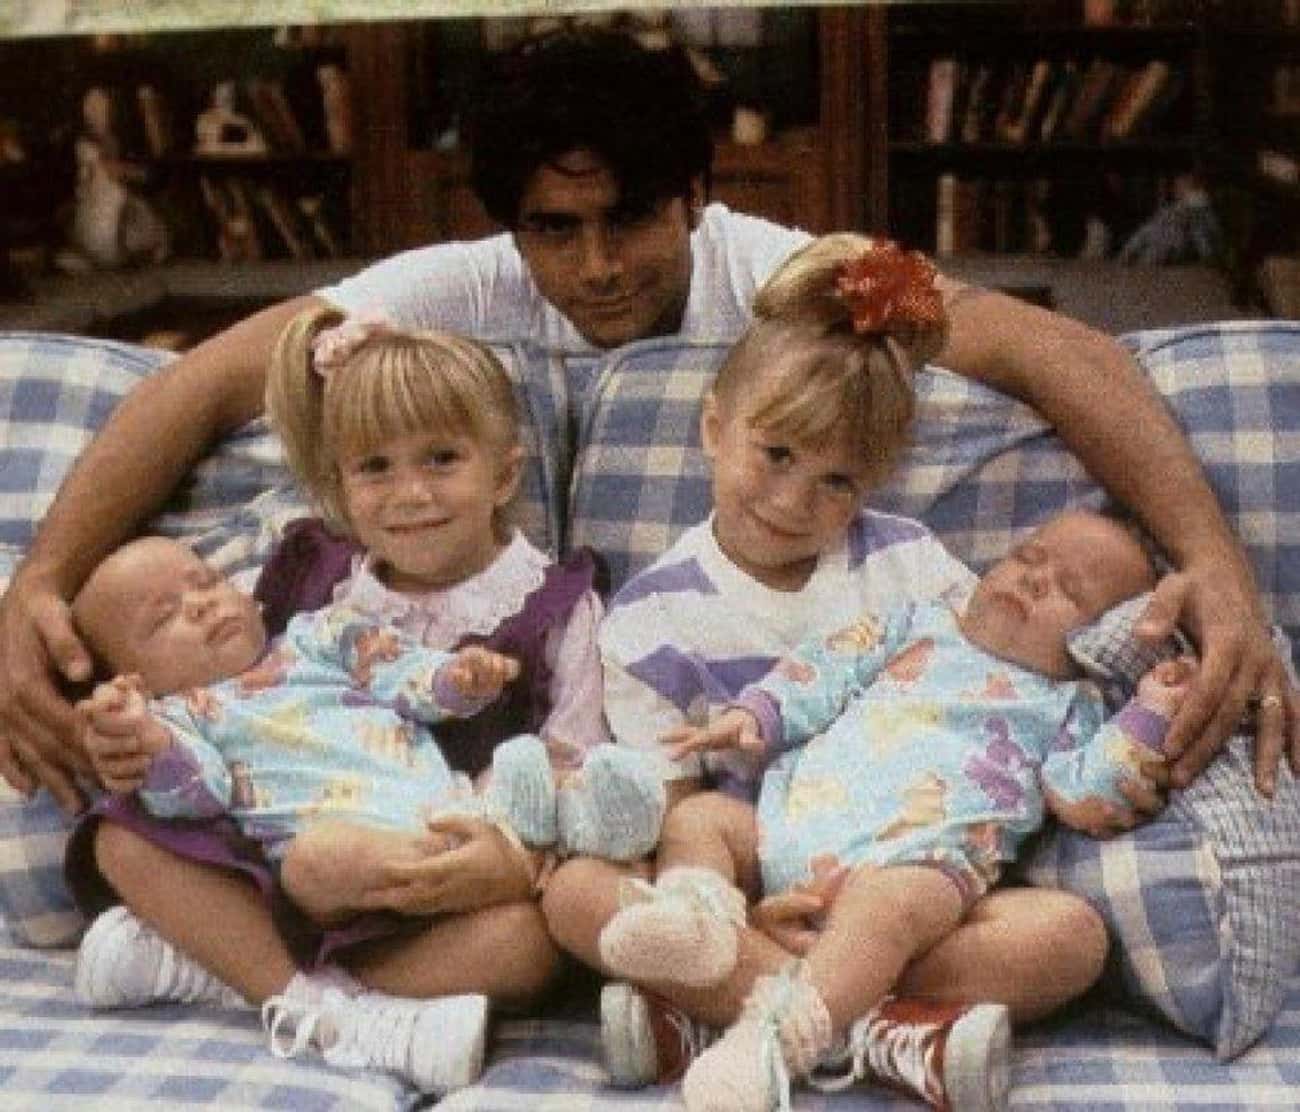 John Stamos Fought to Keep Both Mary-Kate and Ashley